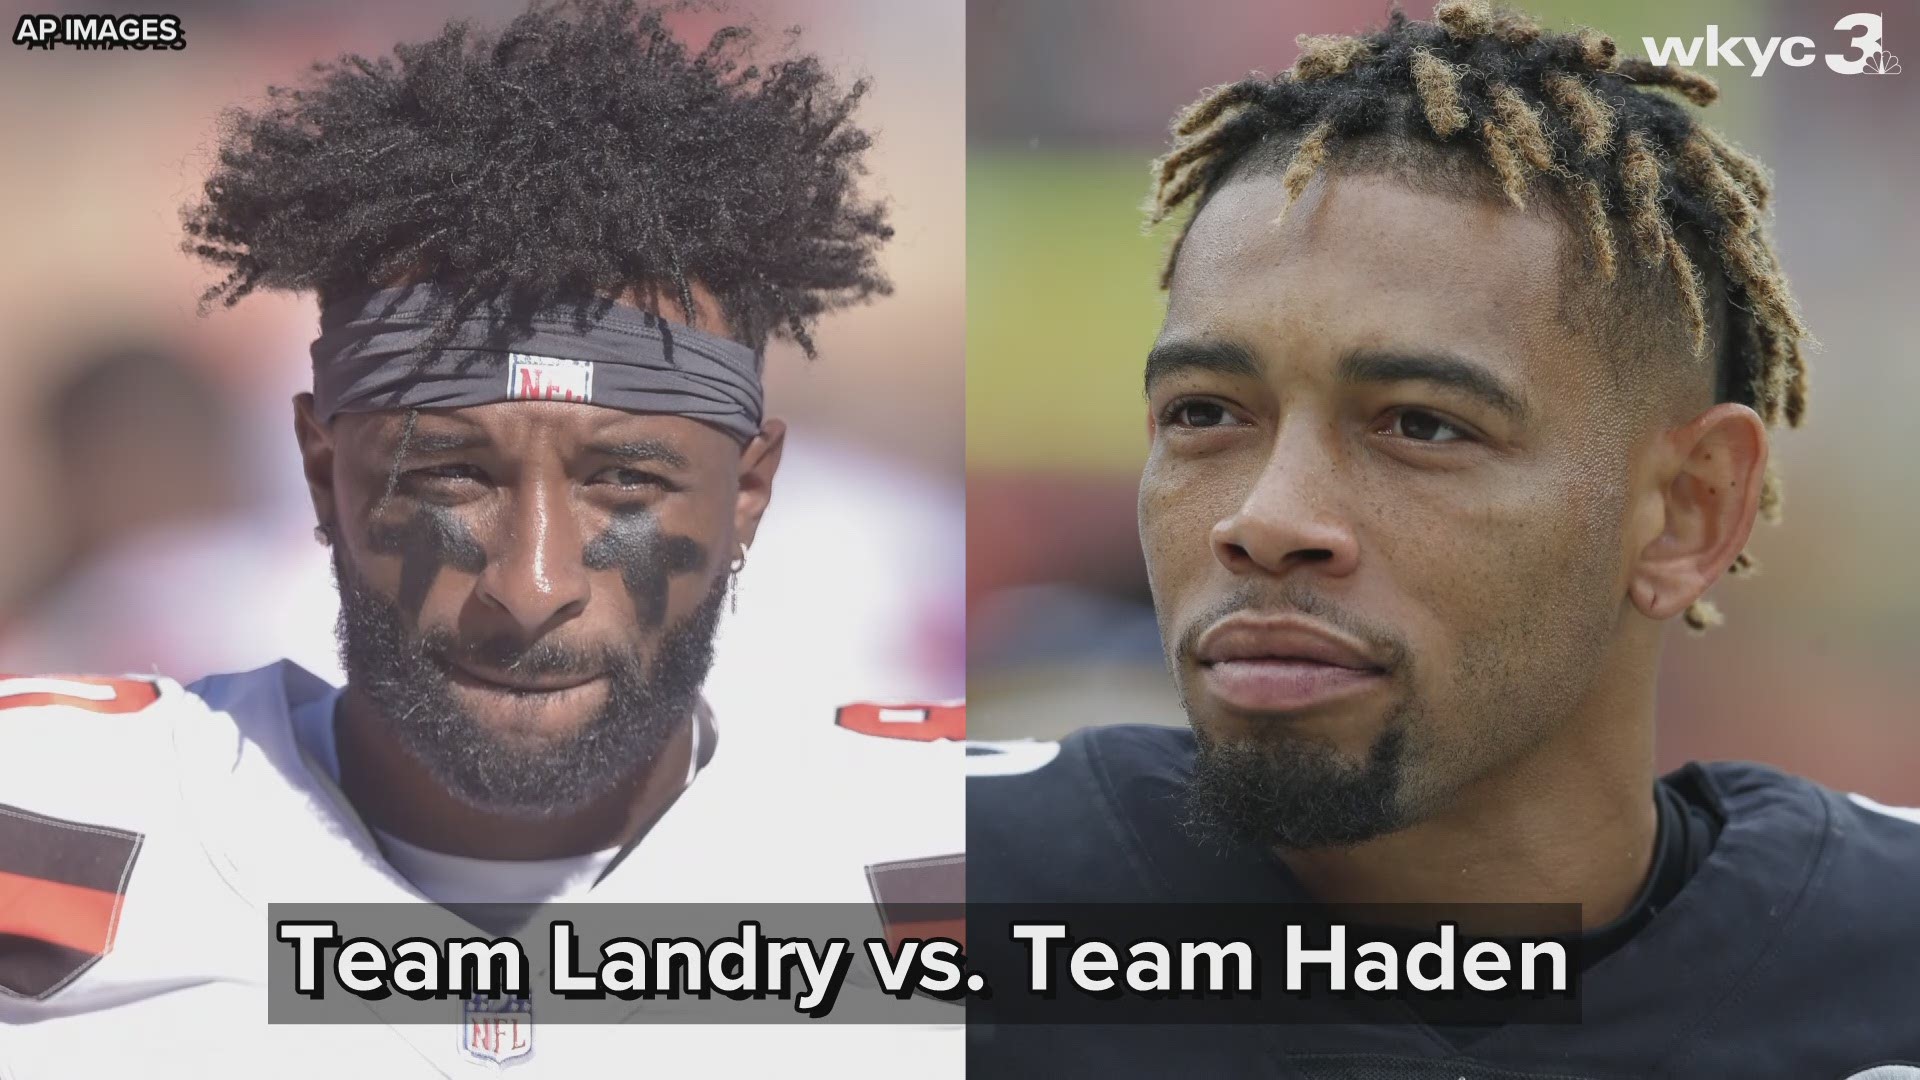 Cleveland Browns wide receiver Jarvis Landry took to Instagram on Monday to reveal the format for his upcoming celebrity softball game.